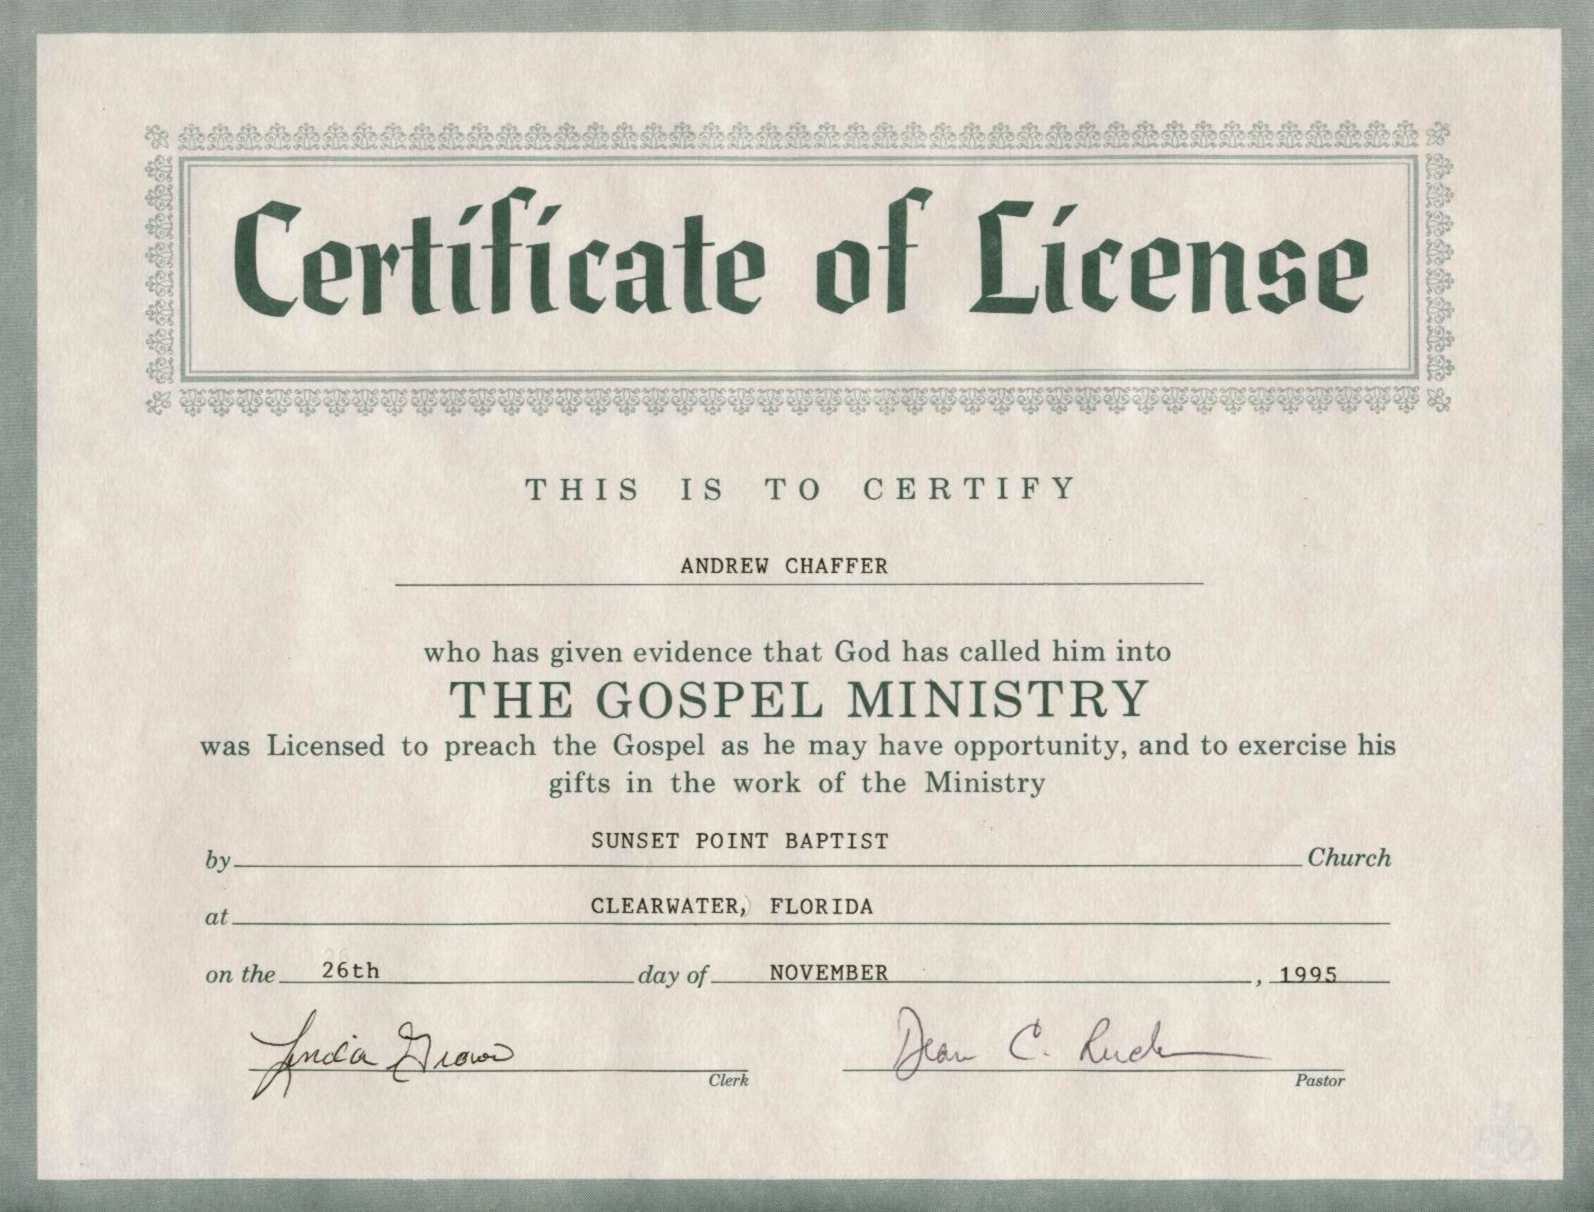 Certificate Of Ordination For Deaconess Example With Regard To Ordination Certificate Templates